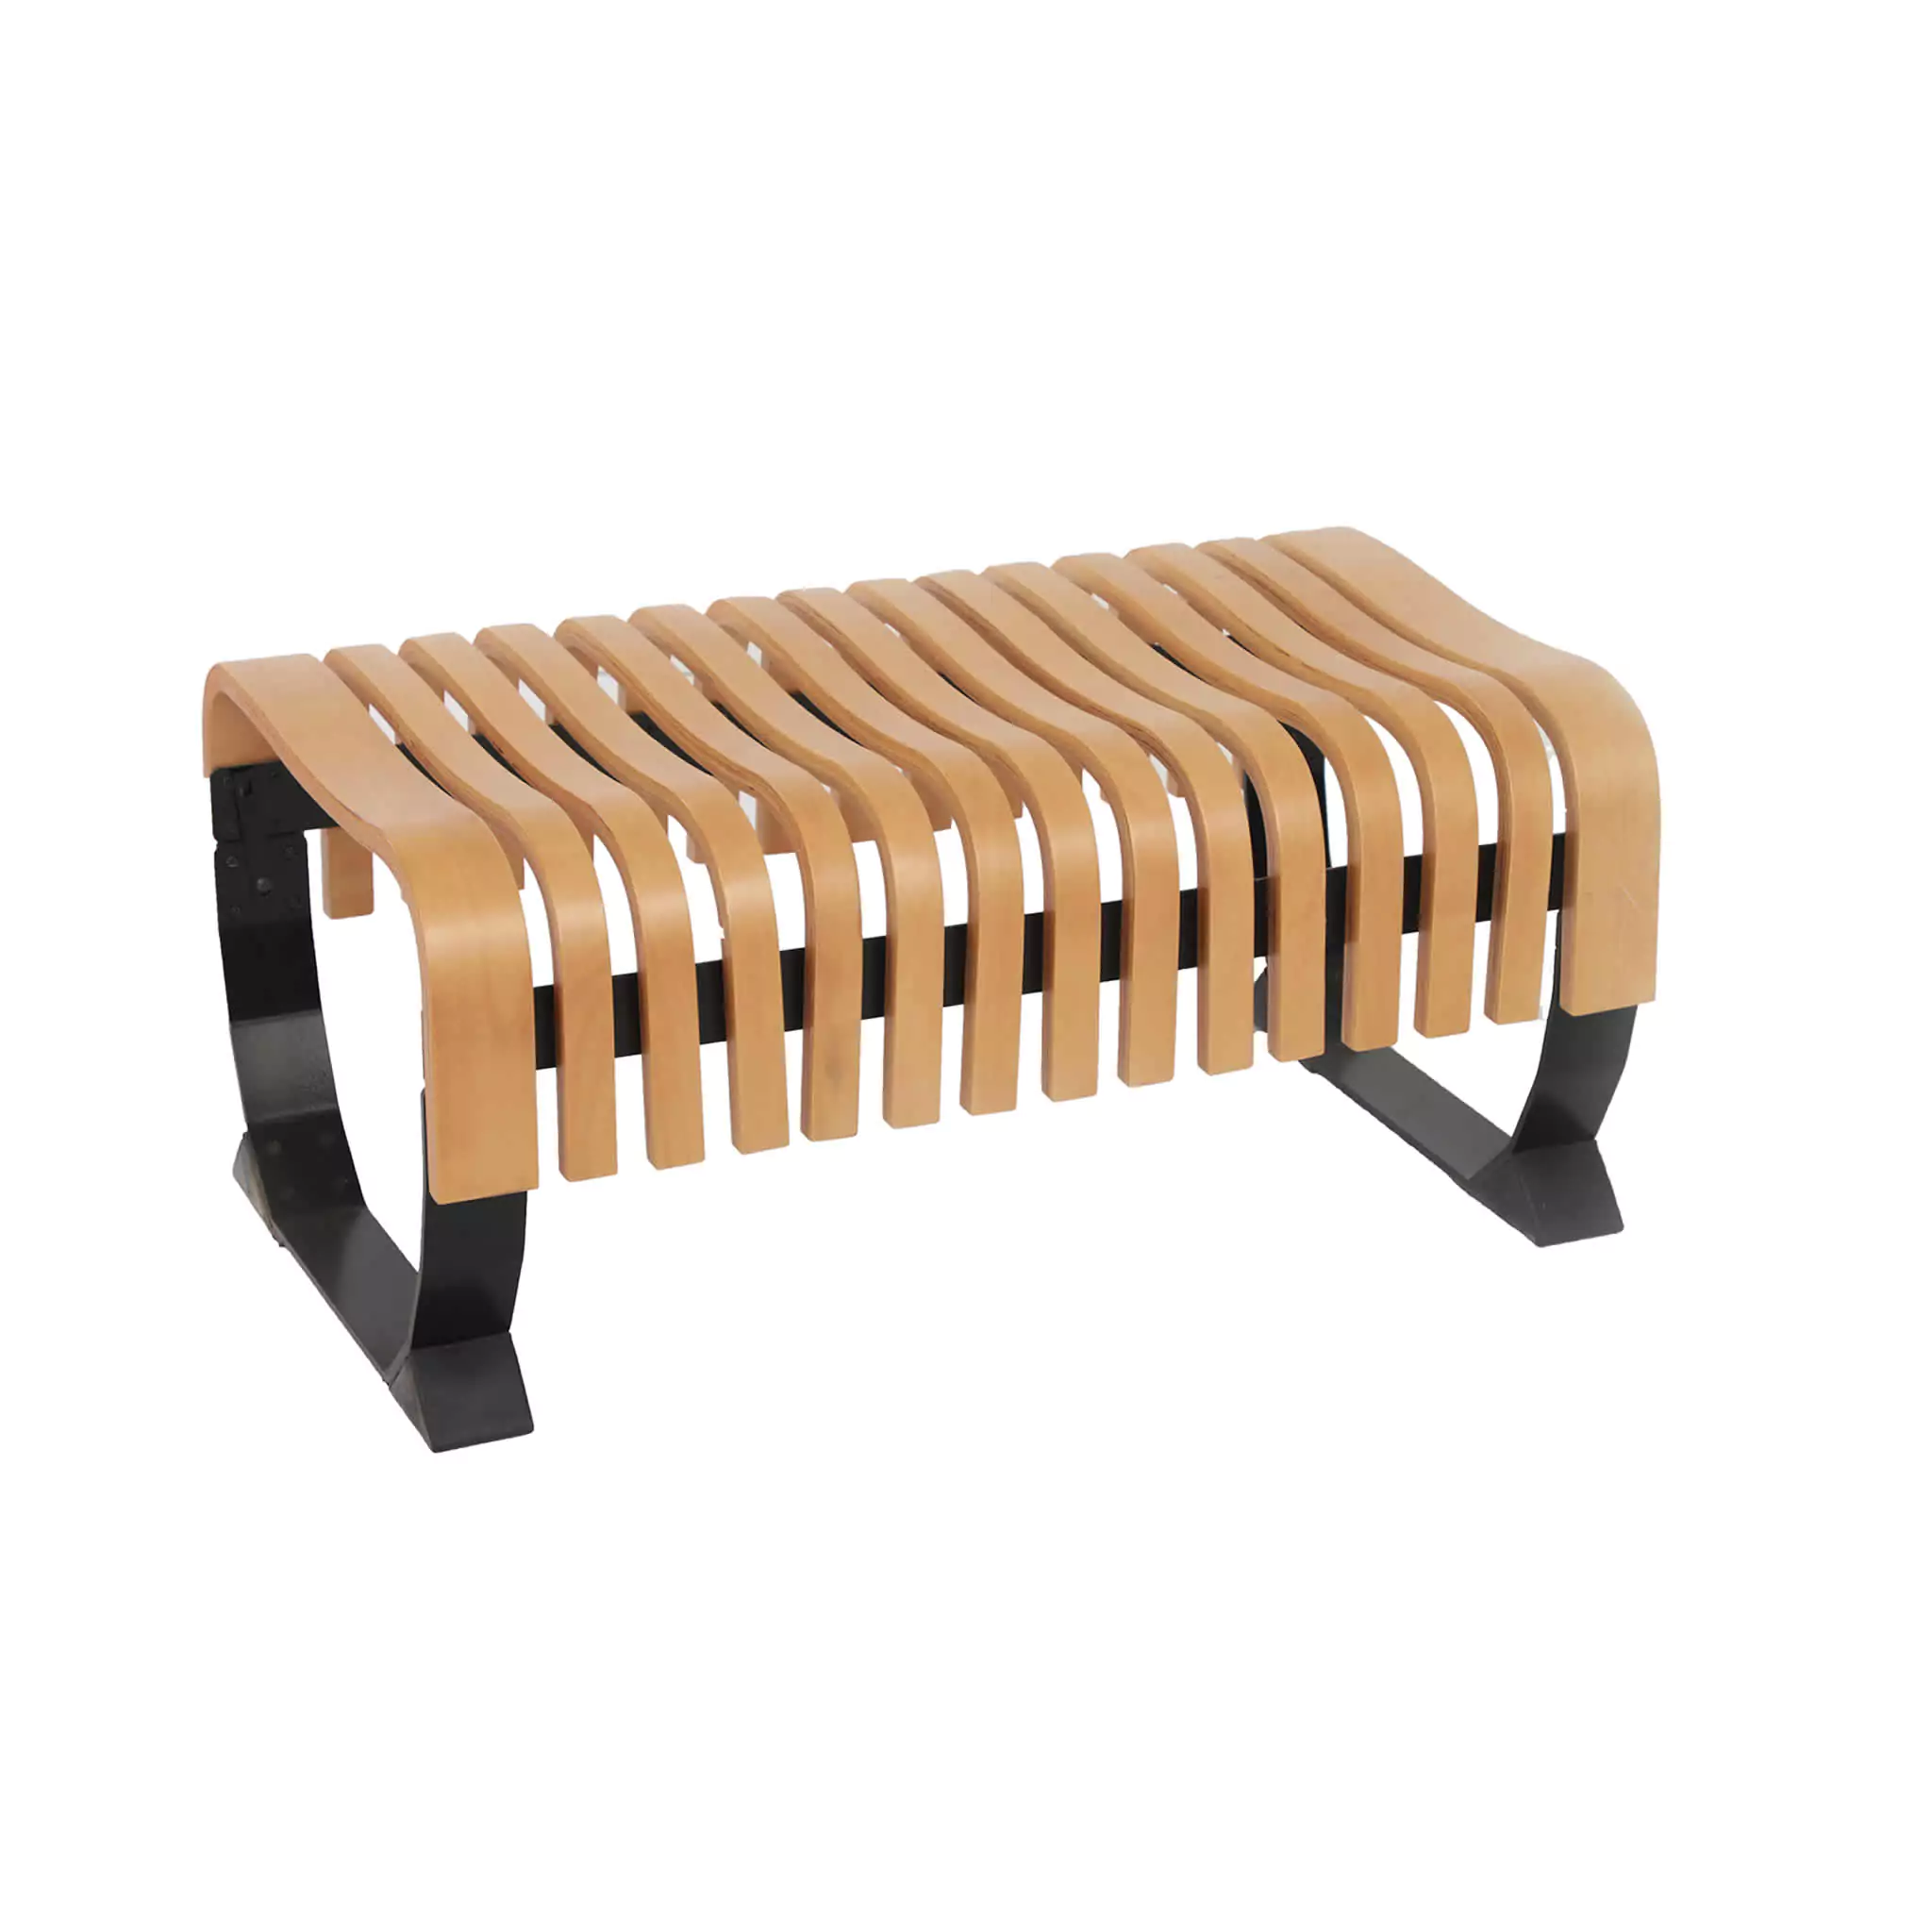 Simko Seating Product Foyer Wooden Bench